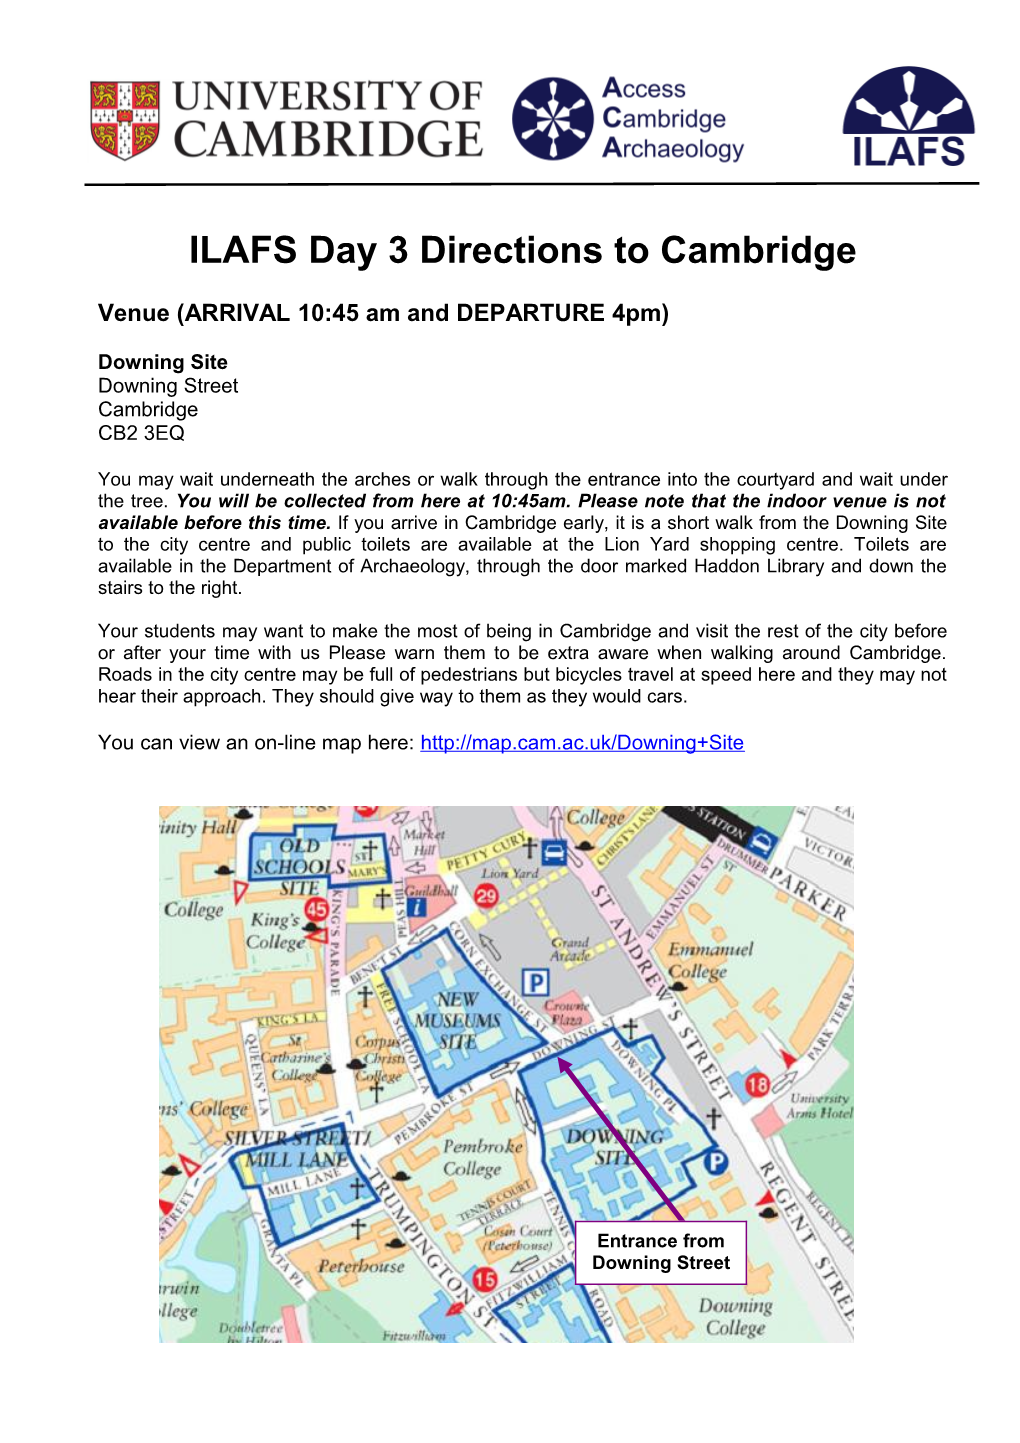 ILAFS Day 3 Directions to Cambridge